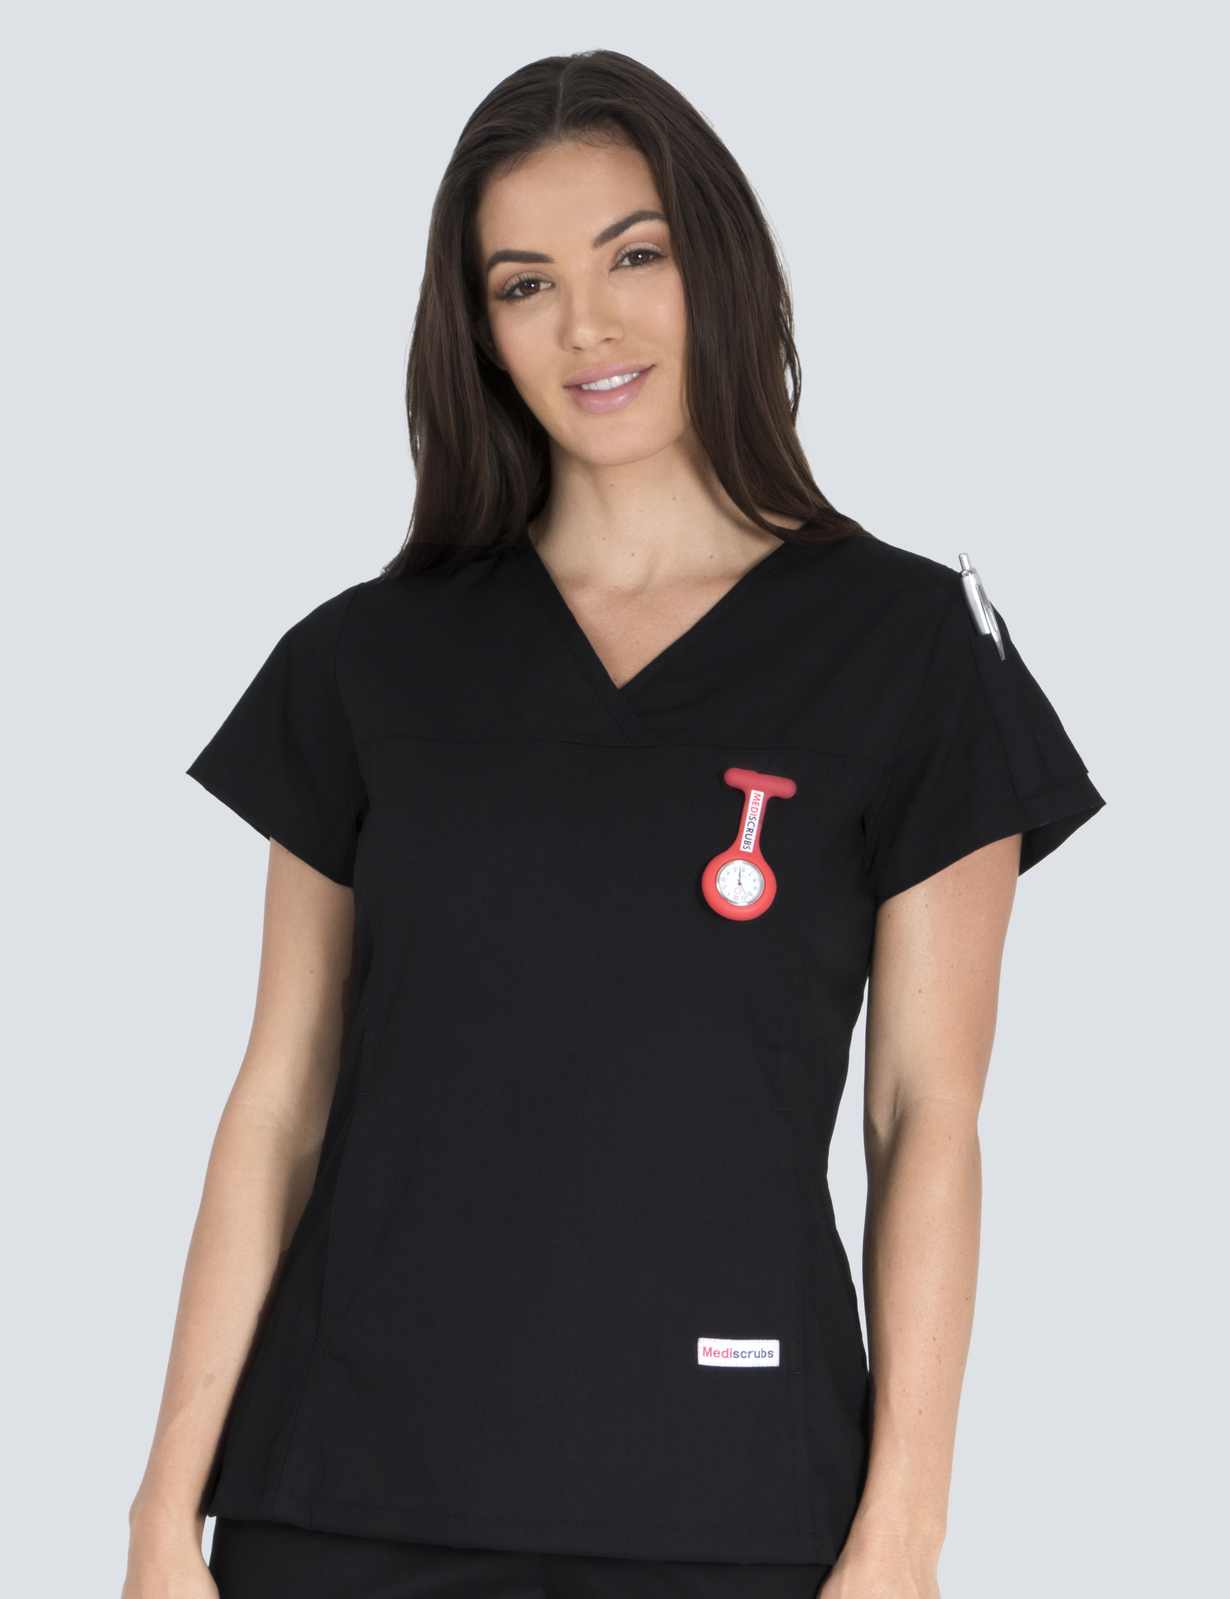 North Shore Private Radiologist Uniform Top Only Bundle ( Women's Fit Solid Top in Black + Logo) 